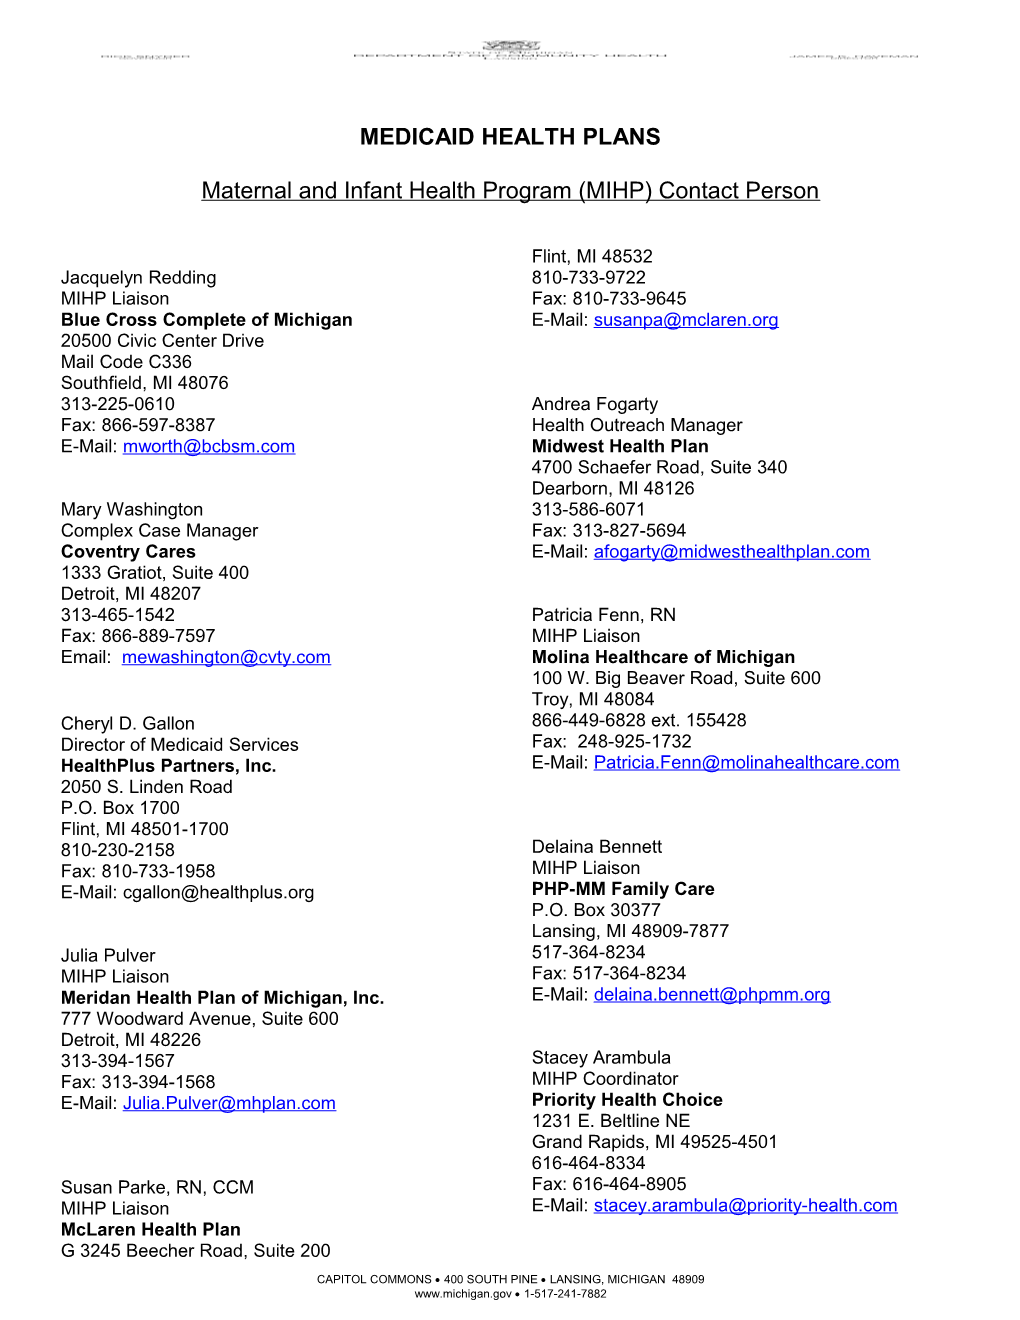 Maternal and Infant Health Program (MIHP) Contact Person